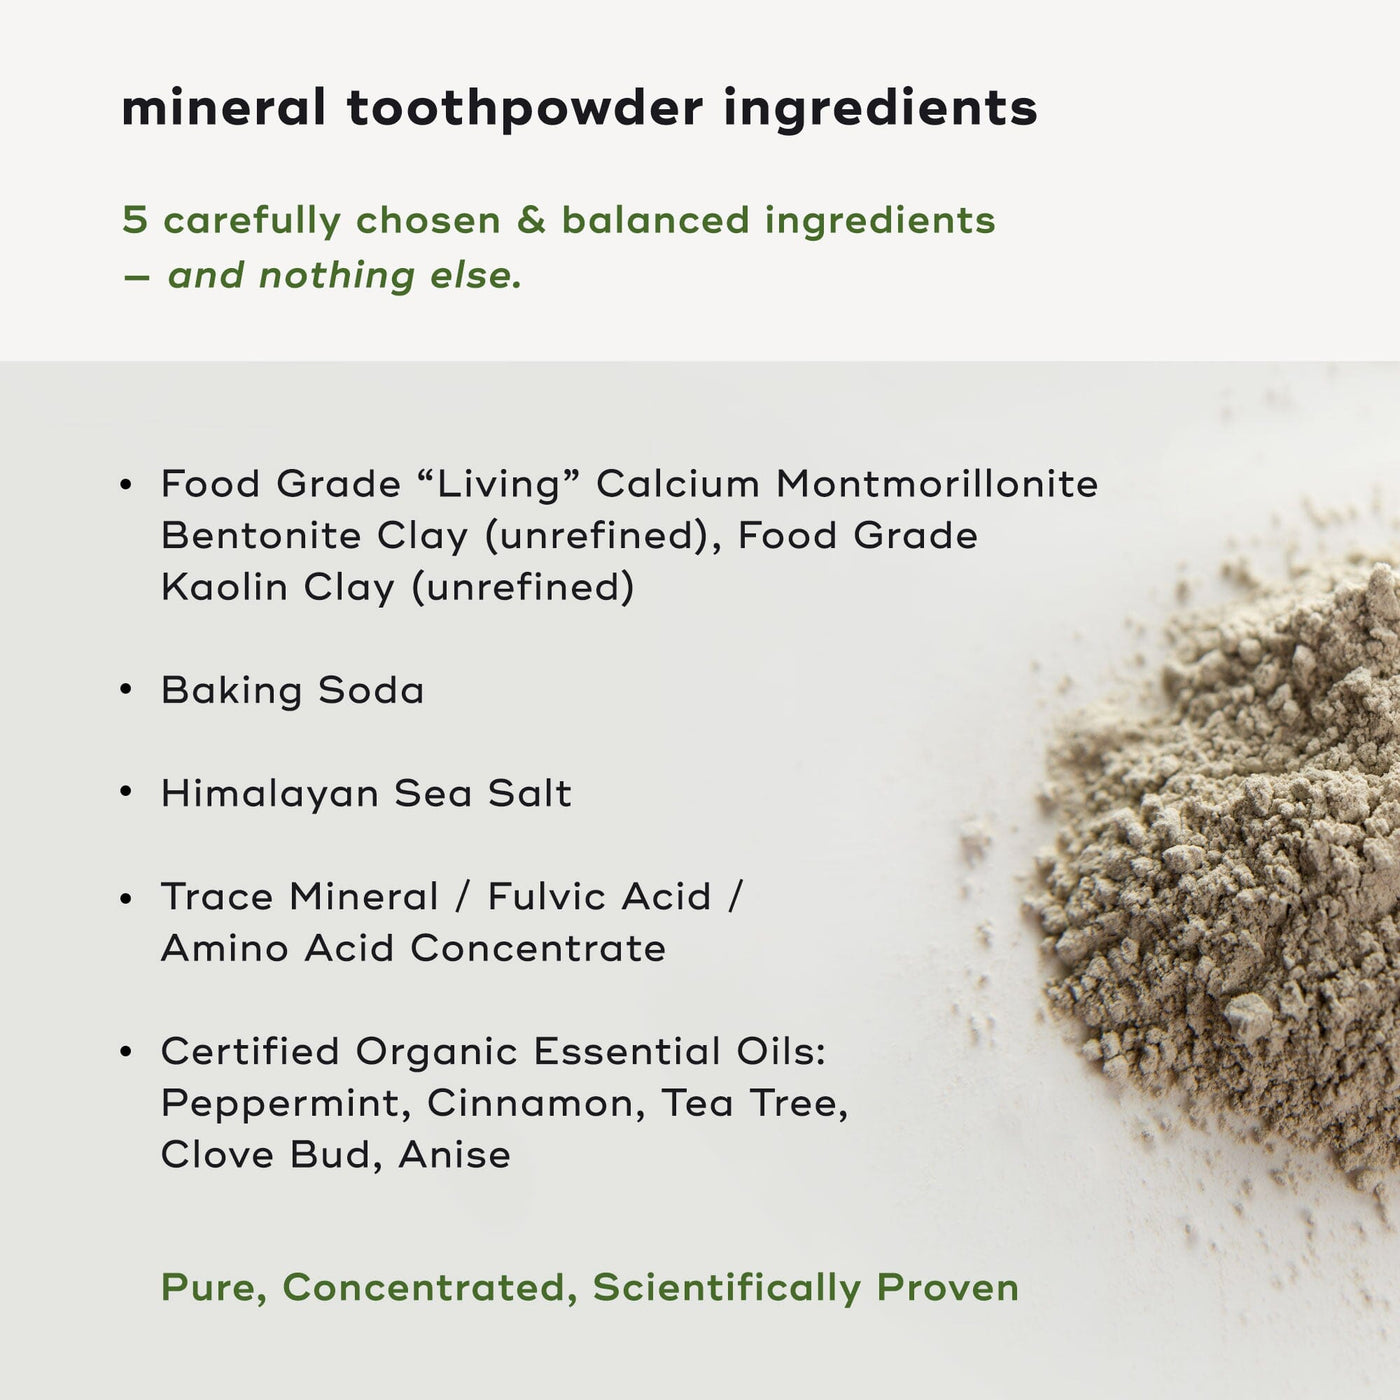 Mineral Toothpowder Ingredients - 5 Carefully chosen and balanced ingredients. 